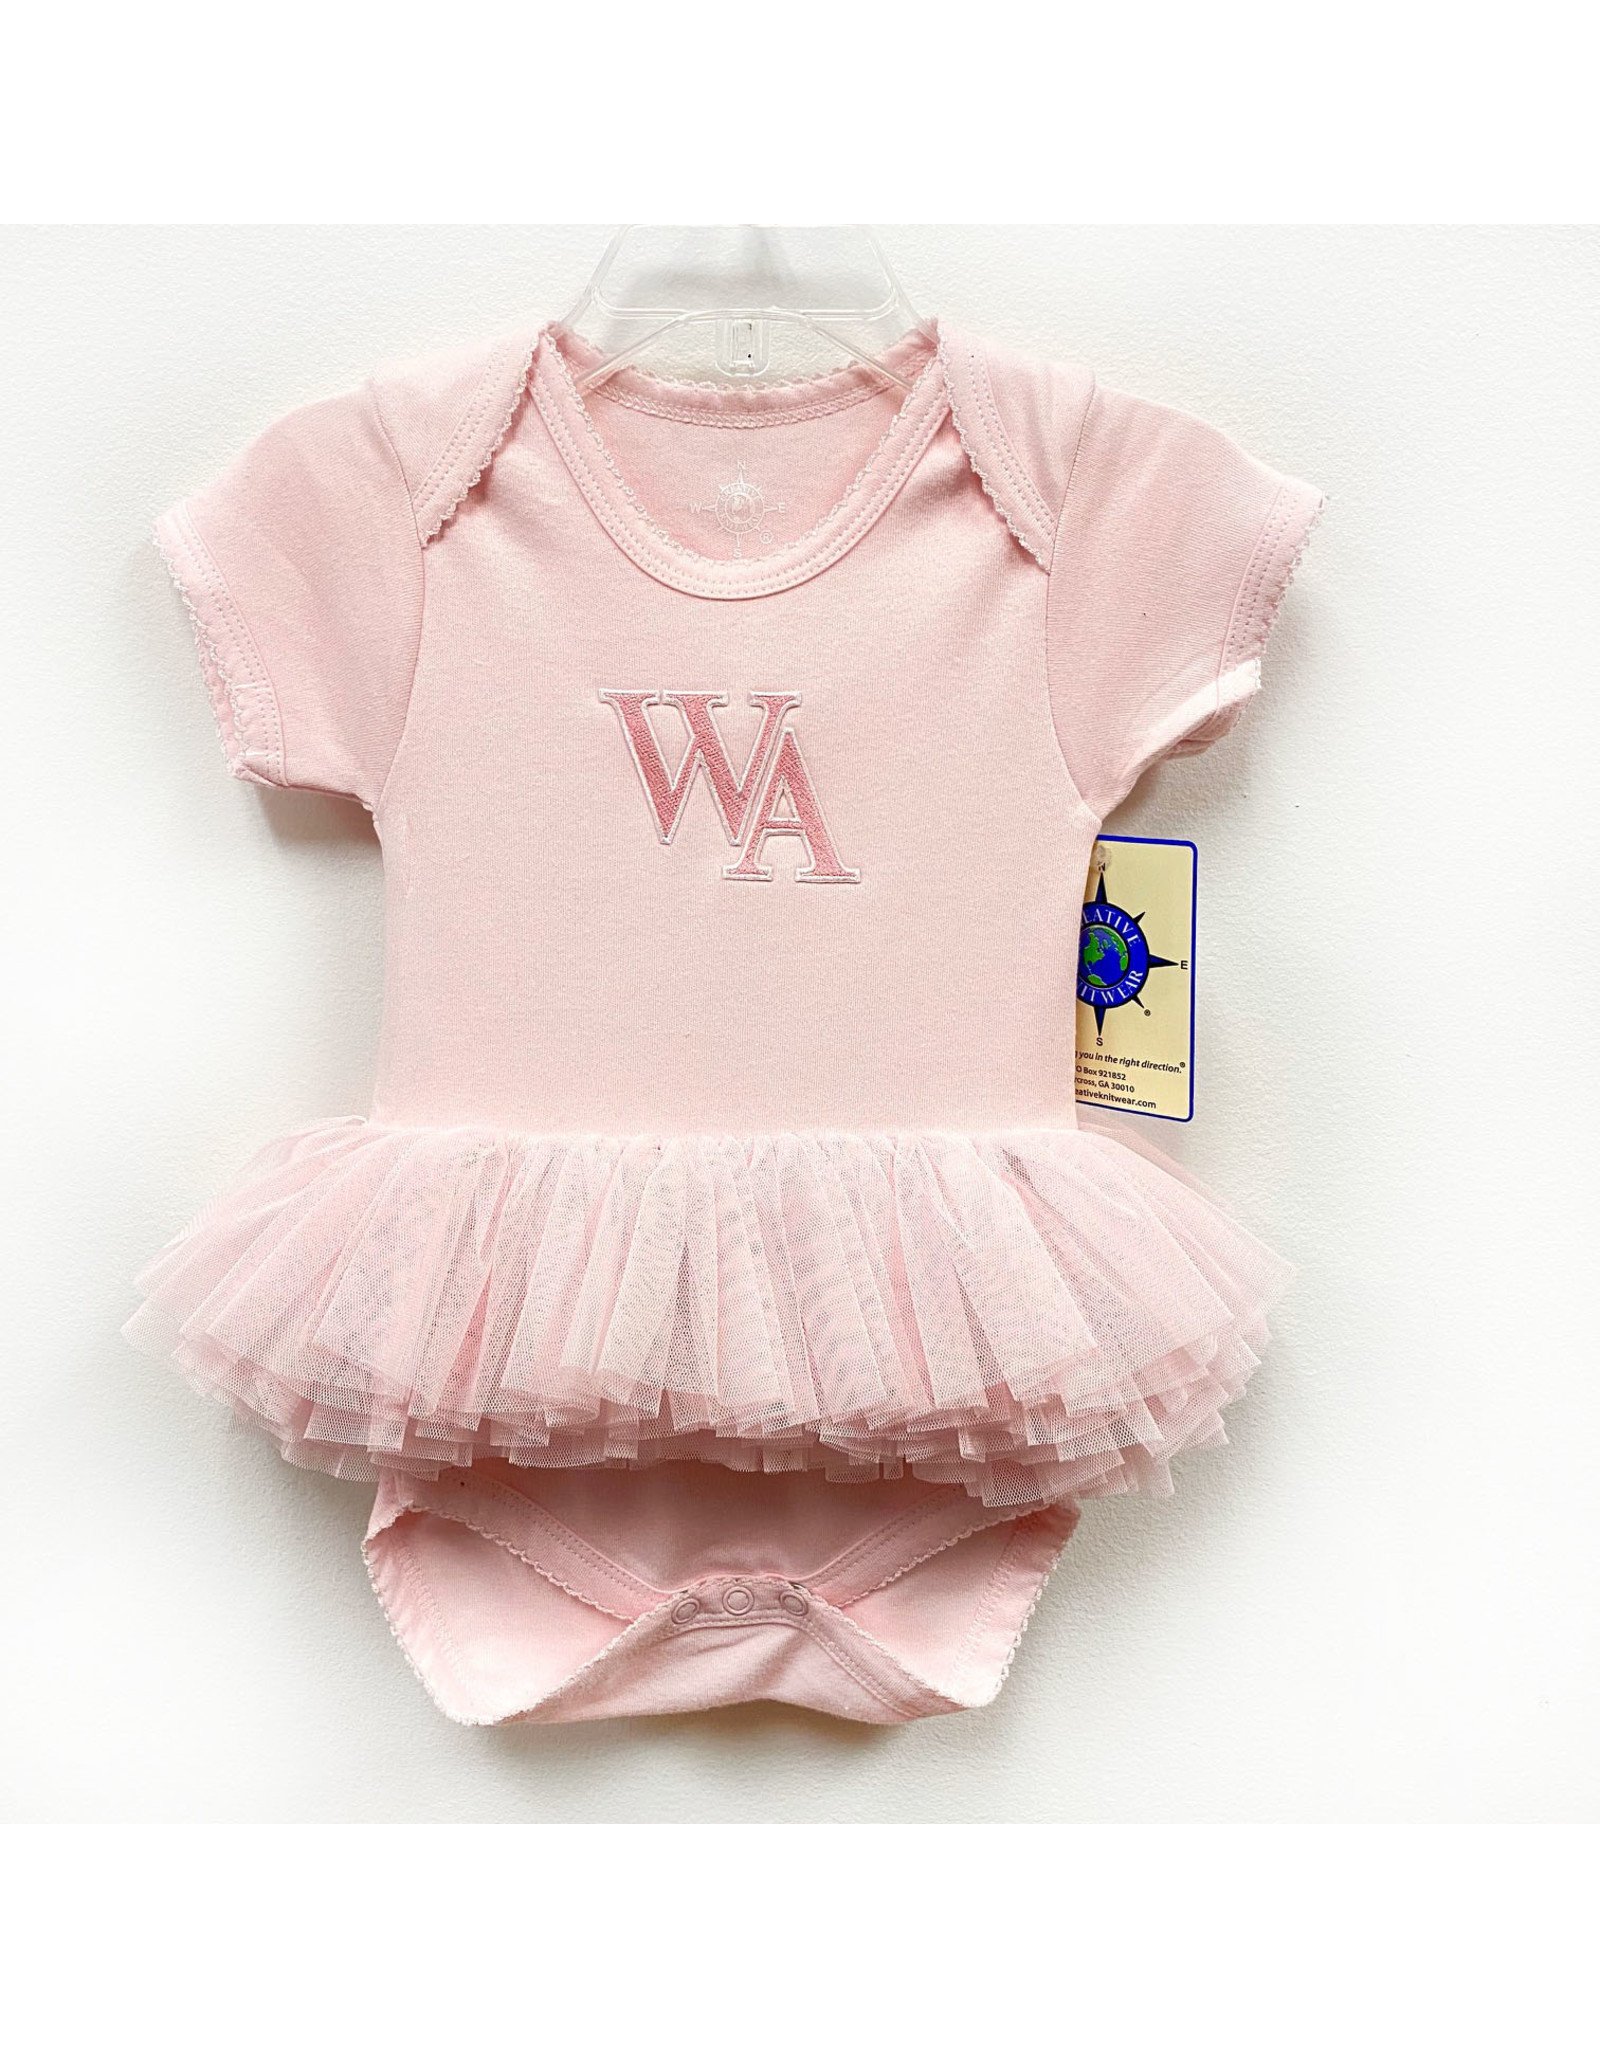 The Game Baby Pink Tutu Bodysuit by Creative Knitwear